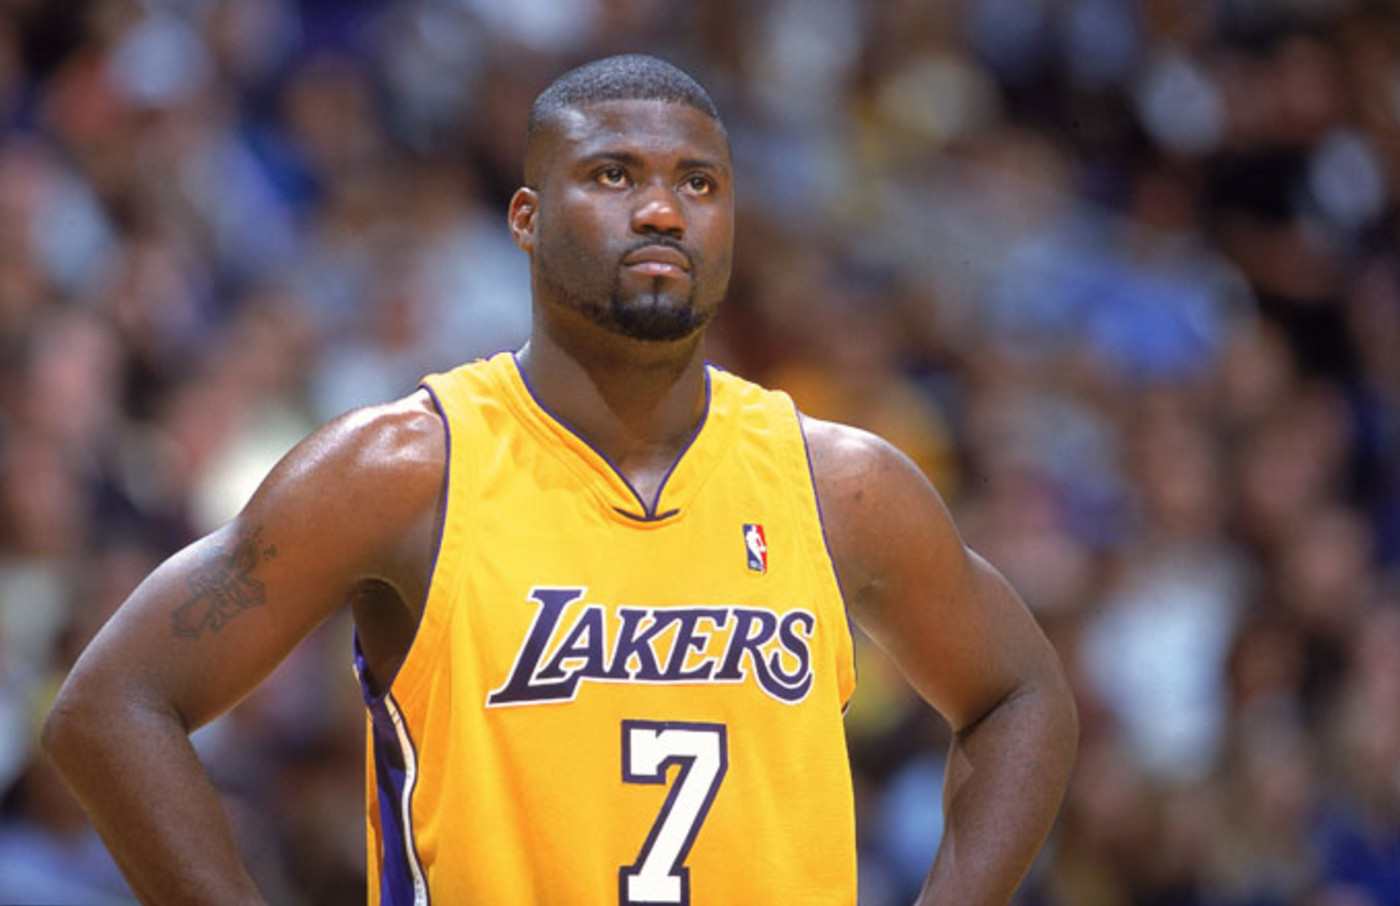 Isaiah Rider Reportedly Threatened to Pull Gun at Tournament He ...